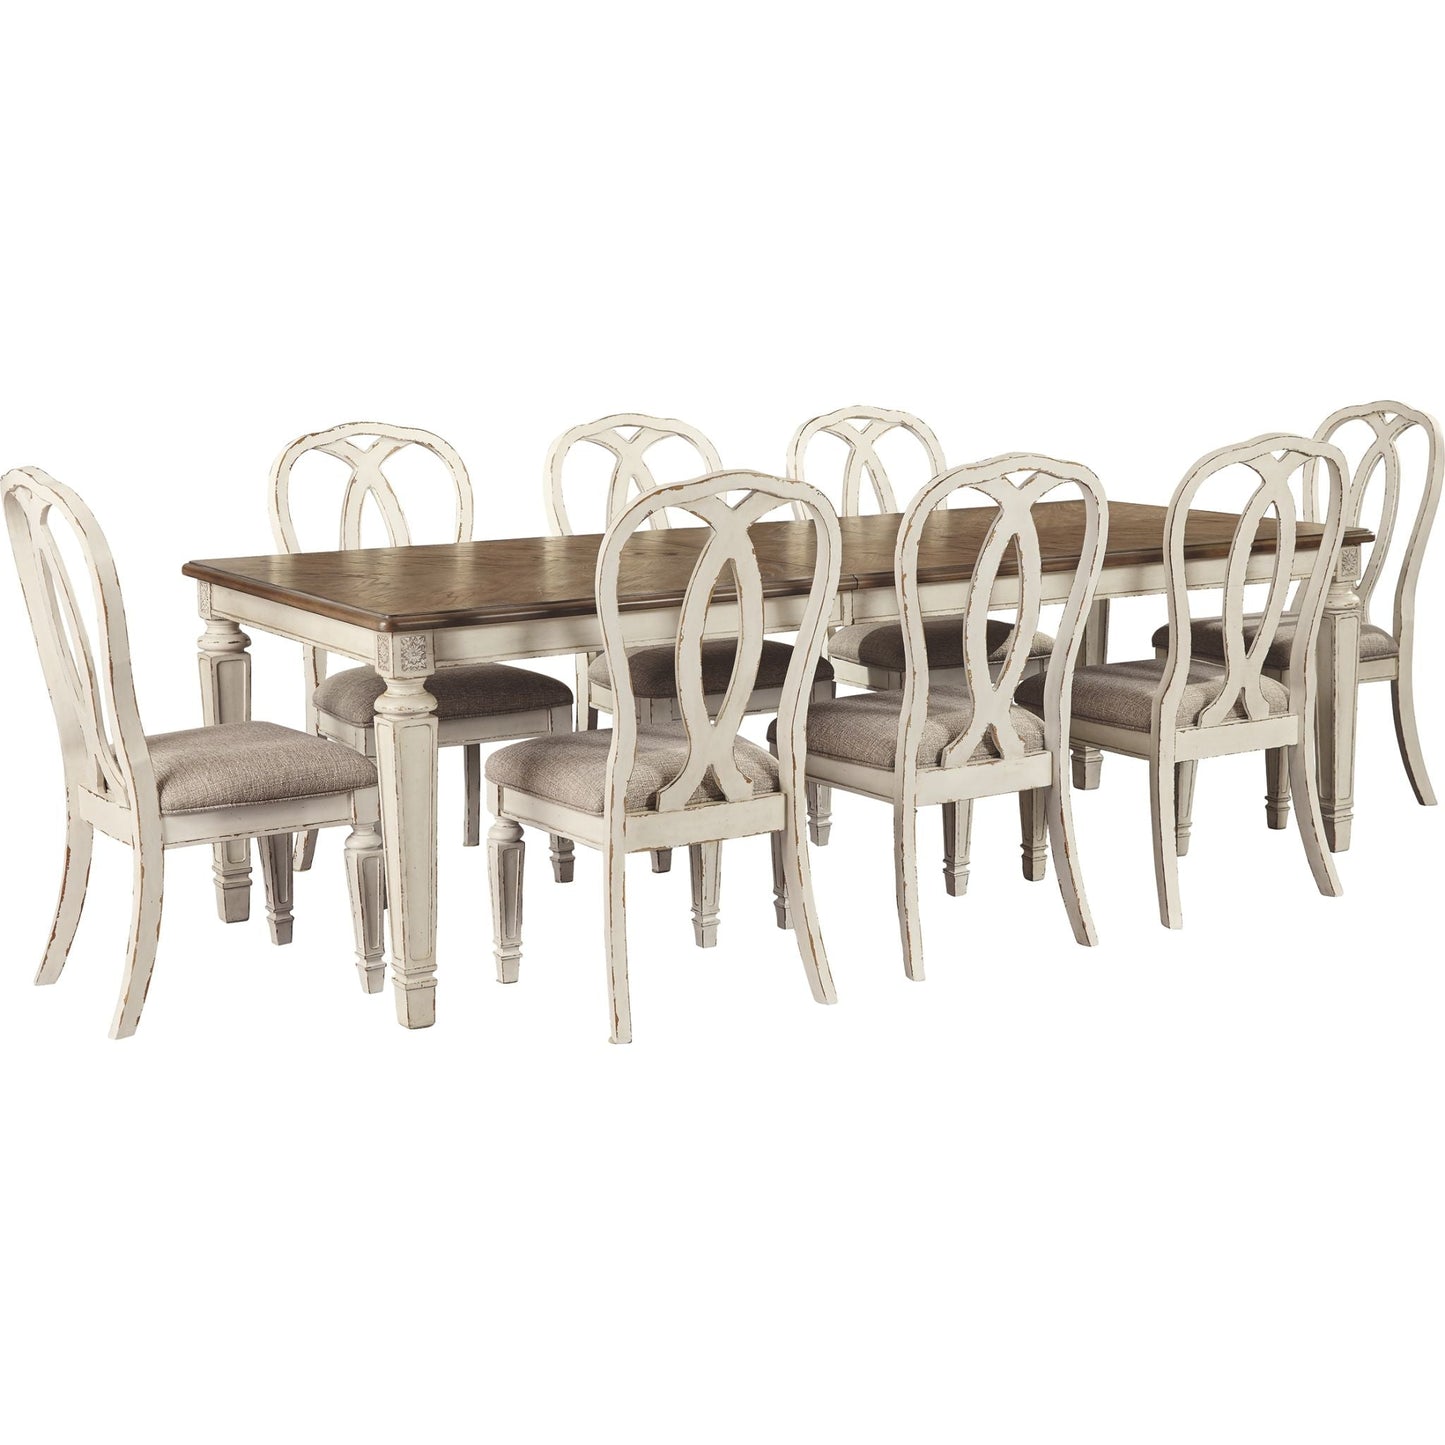 Realyn 9 Piece Dining Room - Chipped White - (PKG002230)